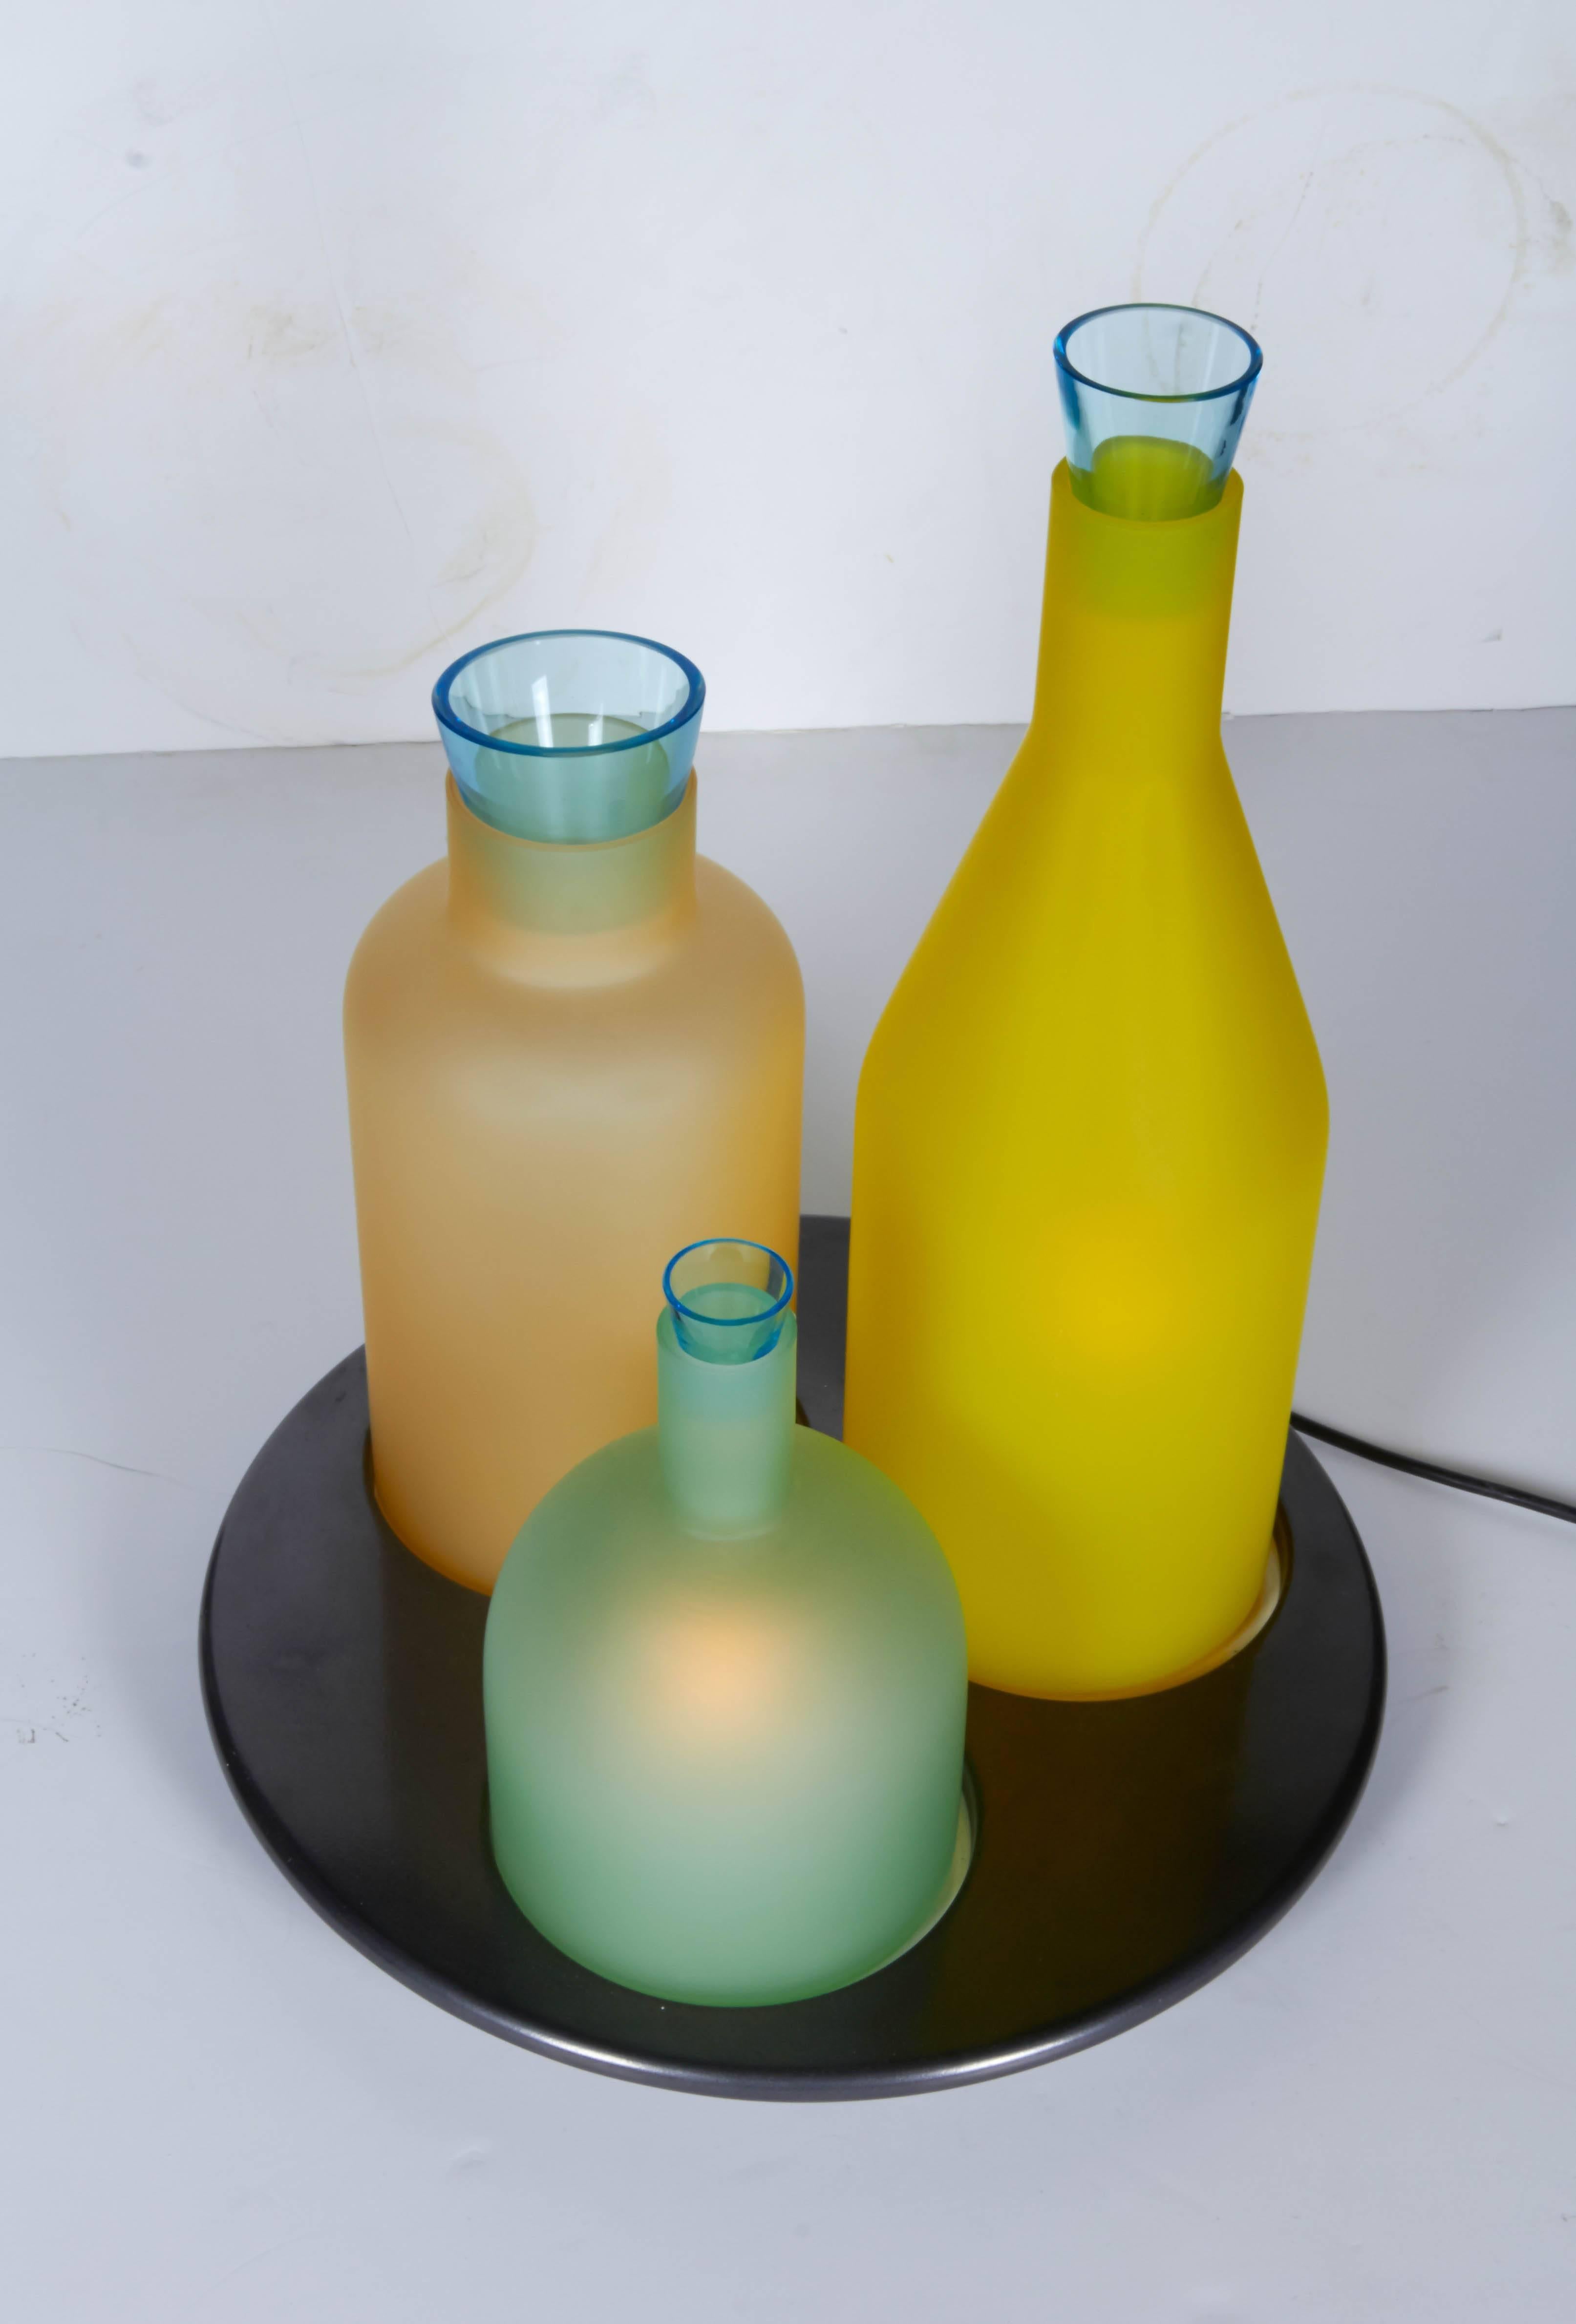 Designed by Gido Rasati in the 1980s for extinct lighting company Itre, this table lamp is named Bacco 1-2-3. Each bottle shape shade and top light blue stopper are handblown glass. The bottle shades are satin finished in green, amber and yellow